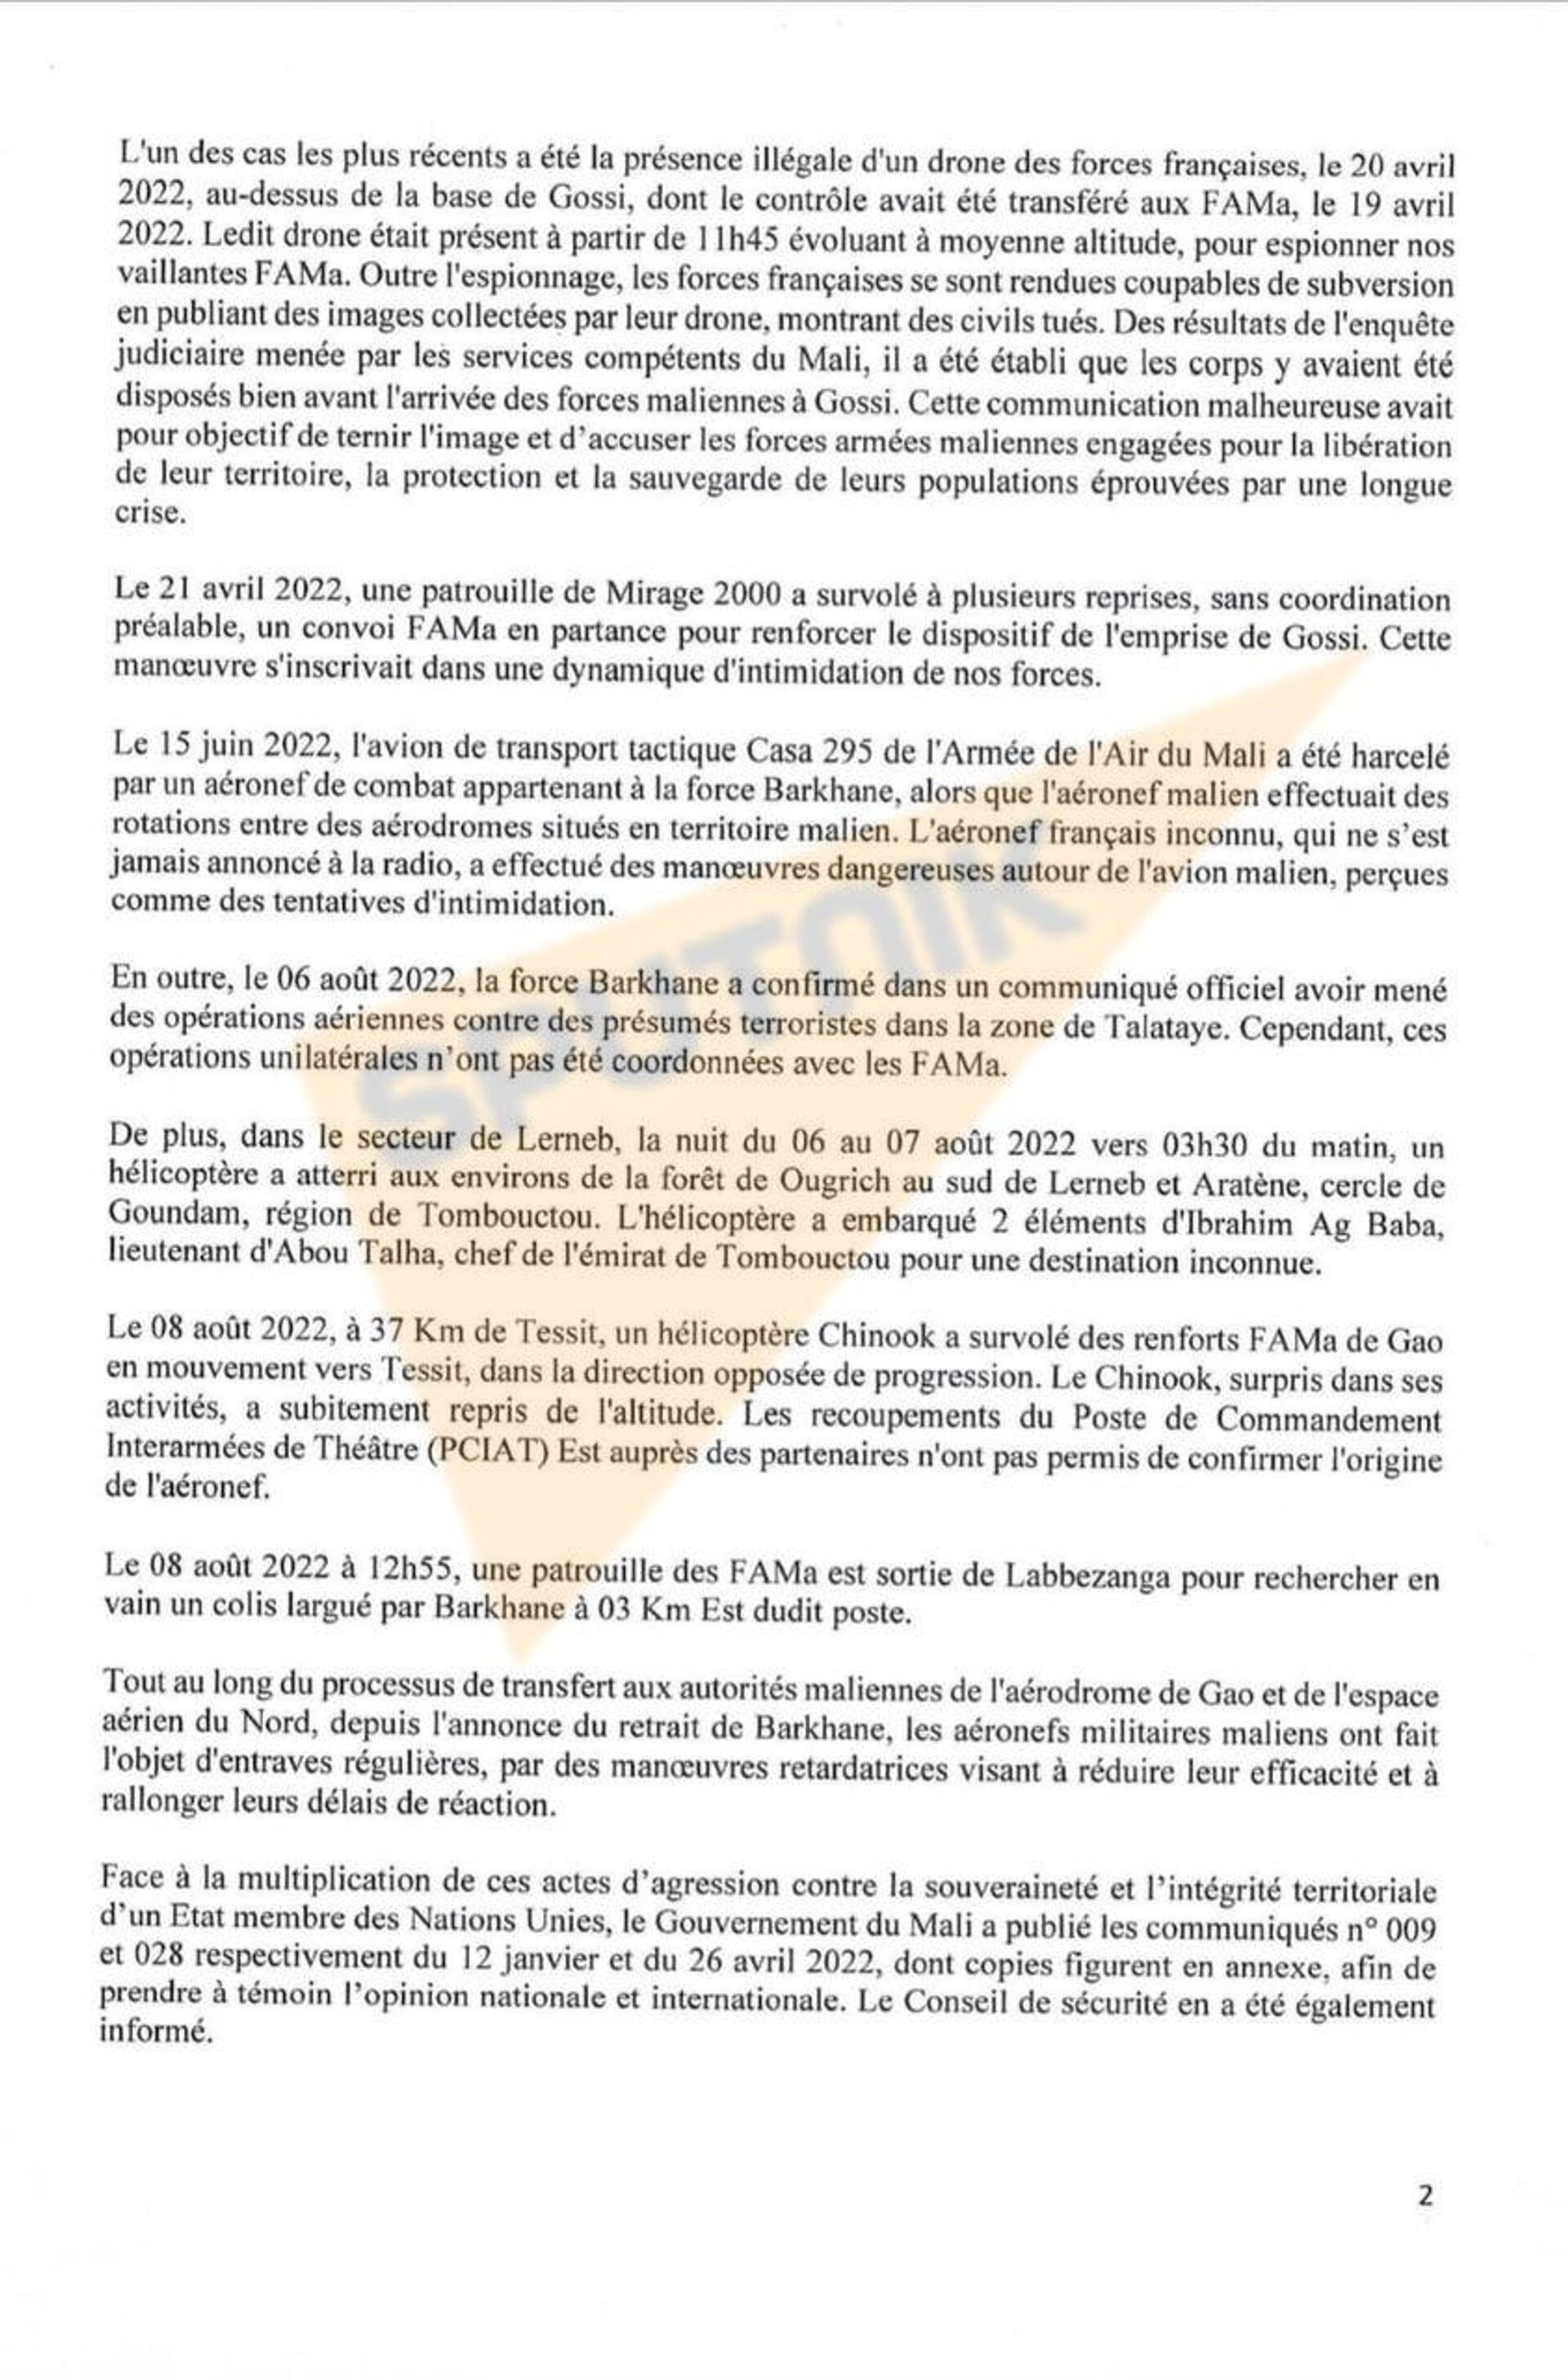 The second page of an August 15, 2022, letter from Diop to Zhang, accusing France of supporting terrorist groups inside Mali. - Sputnik International, 1920, 17.08.2022